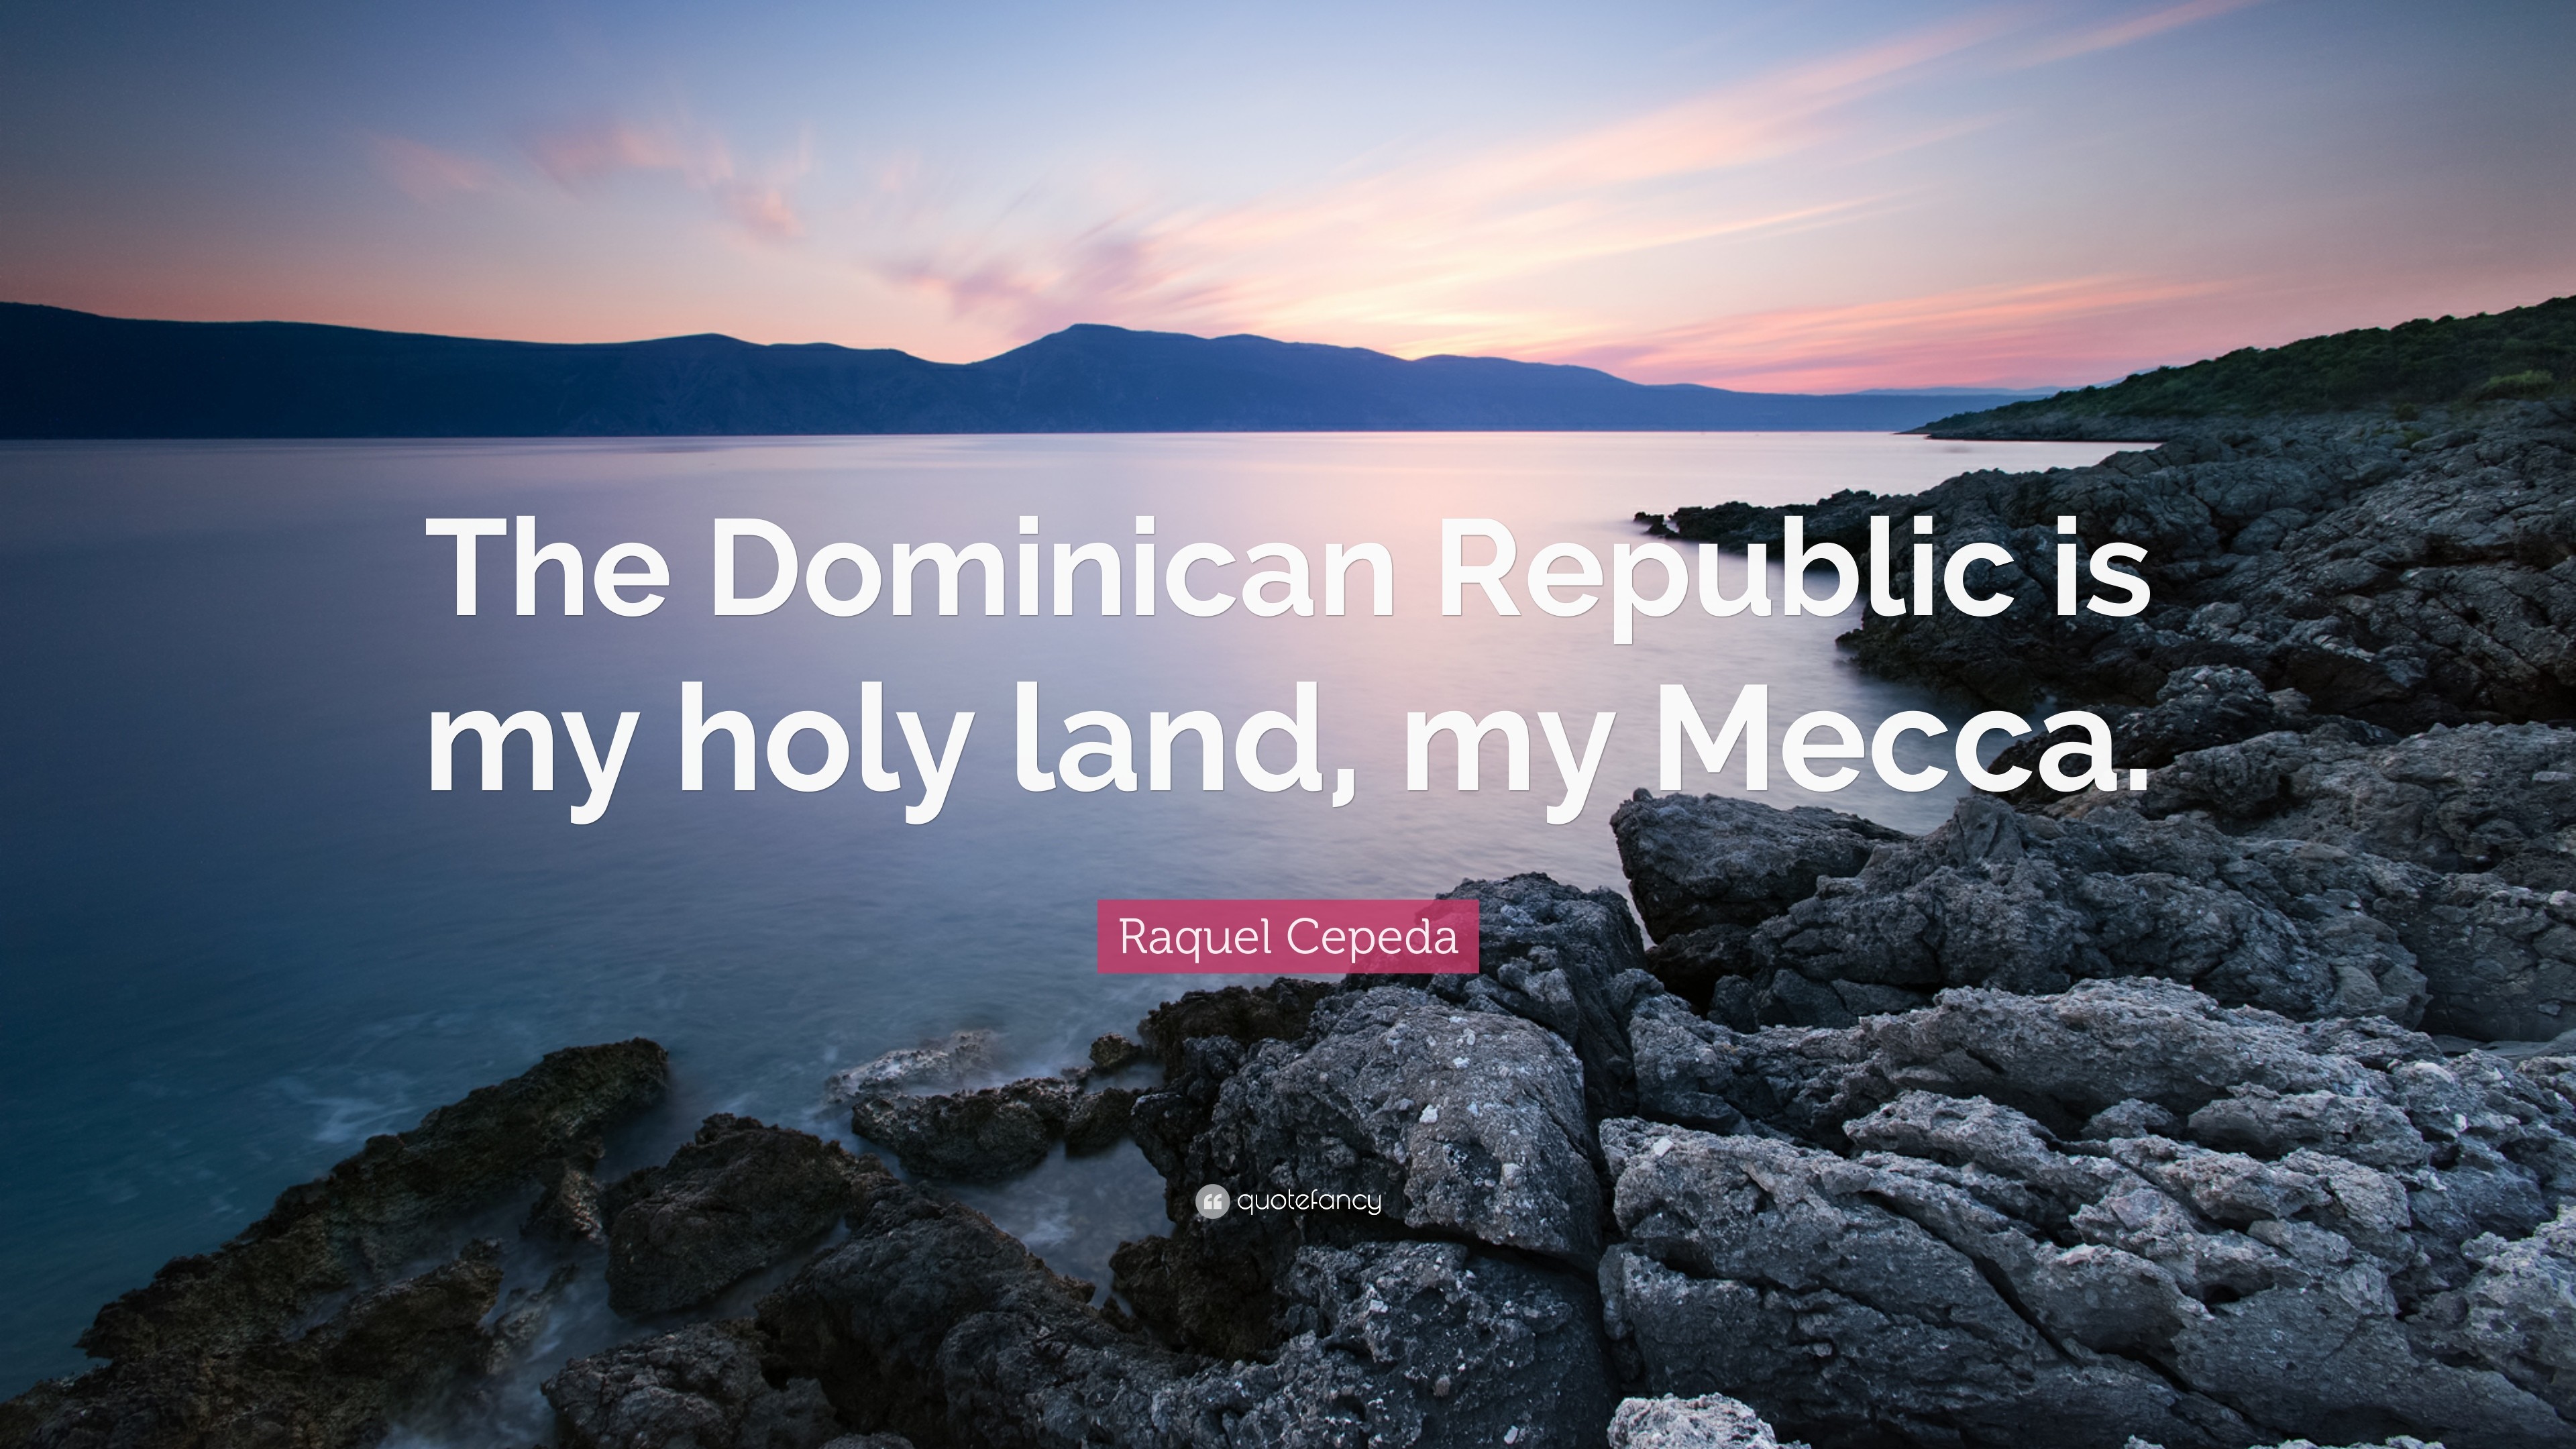 3840x2160 Raquel Cepeda Quote: “The Dominican Republic is my holy land, my Mecca.